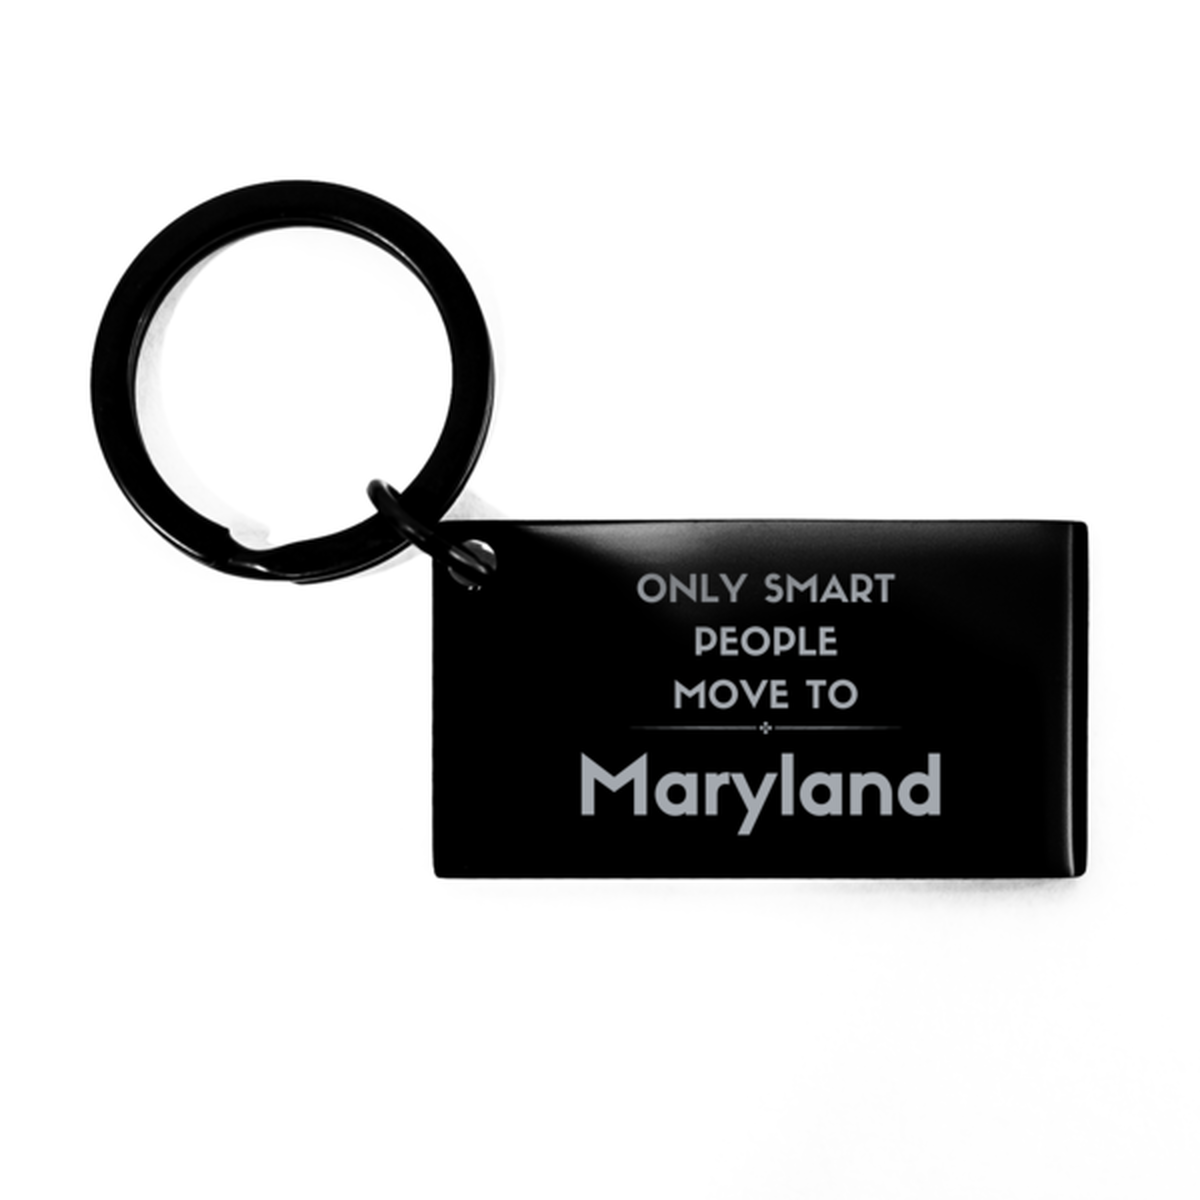 Only smart people move to Maryland Keychain, Gag Gifts For Maryland, Move to Maryland Gifts for Friends Coworker Funny Saying Quote